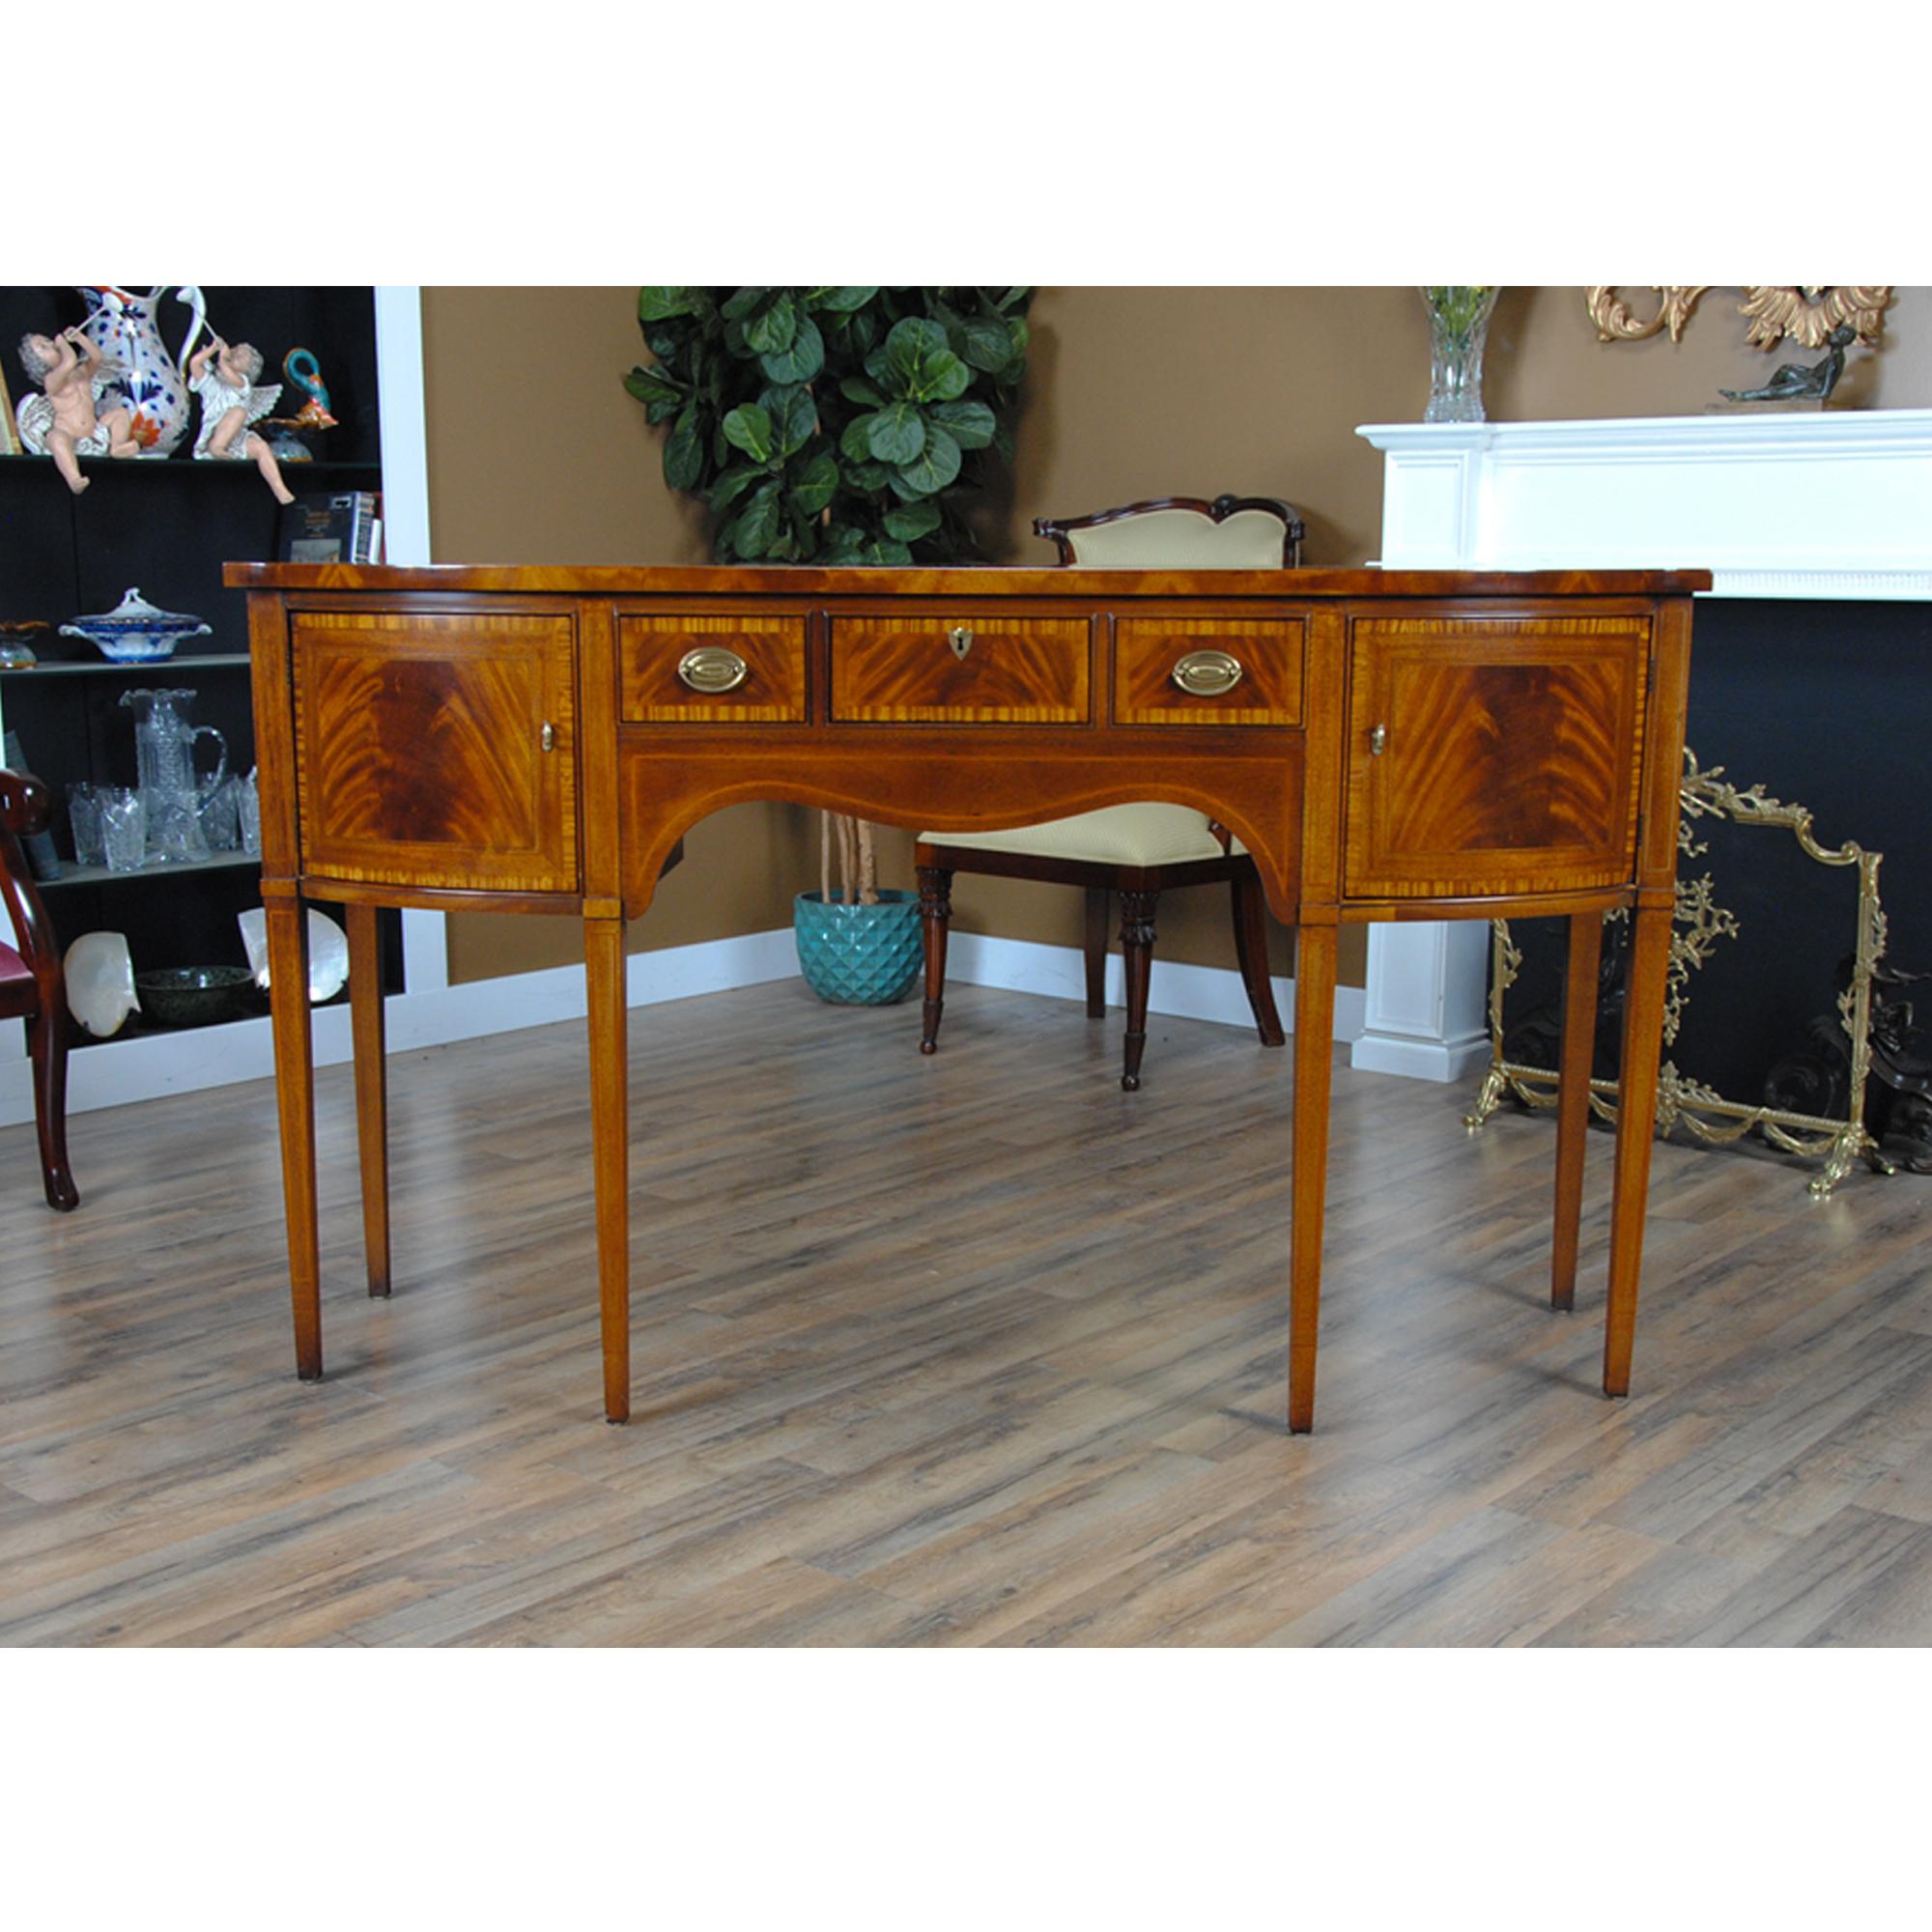 A vintage Drexel Mahogany Sideboard in excellent condition, the top having been recently French polished.

Simple yet sophisticated this beautiful Vintage Drexel Mahogany Sideboard has everything going for it. A slightly shallower size than many